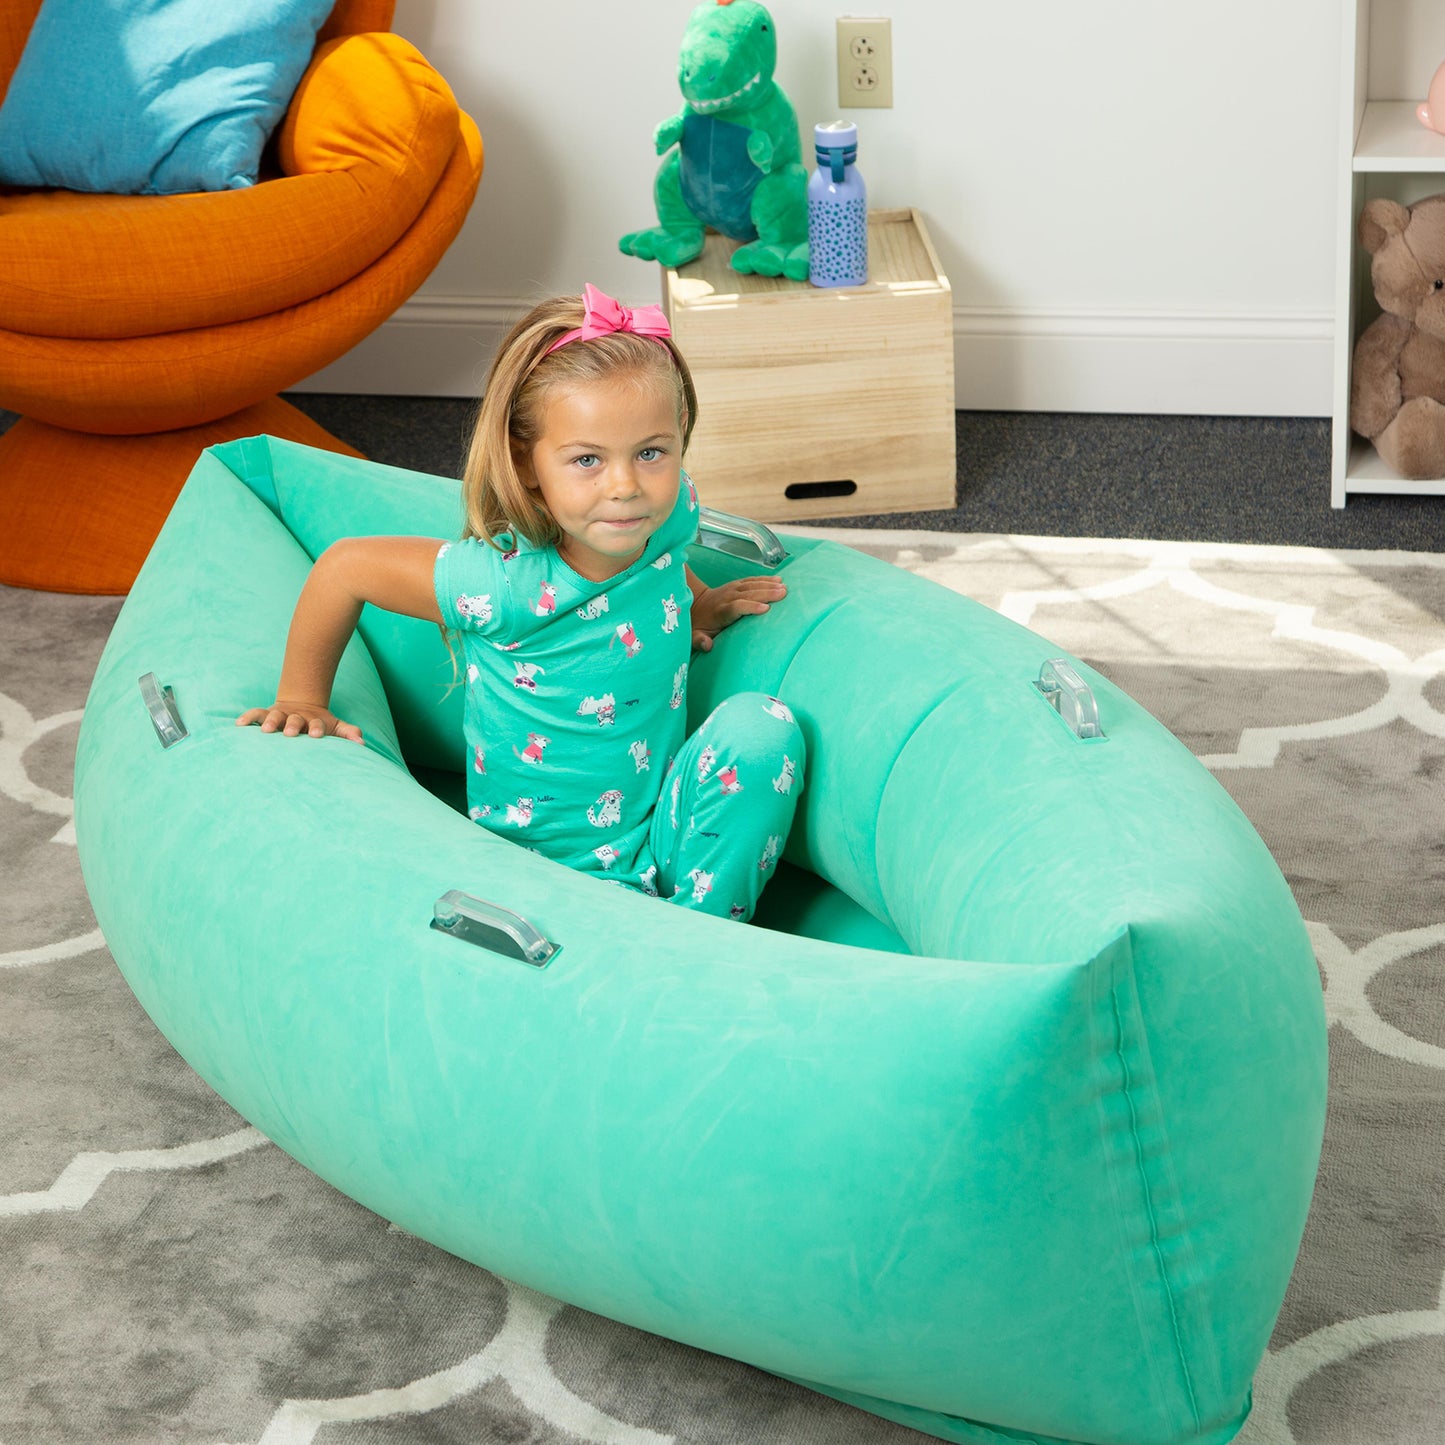 Comfy Hugging Peapod Sensory Pod, 60", Ages 6-12 Up to 3-5'1" Tall, Green